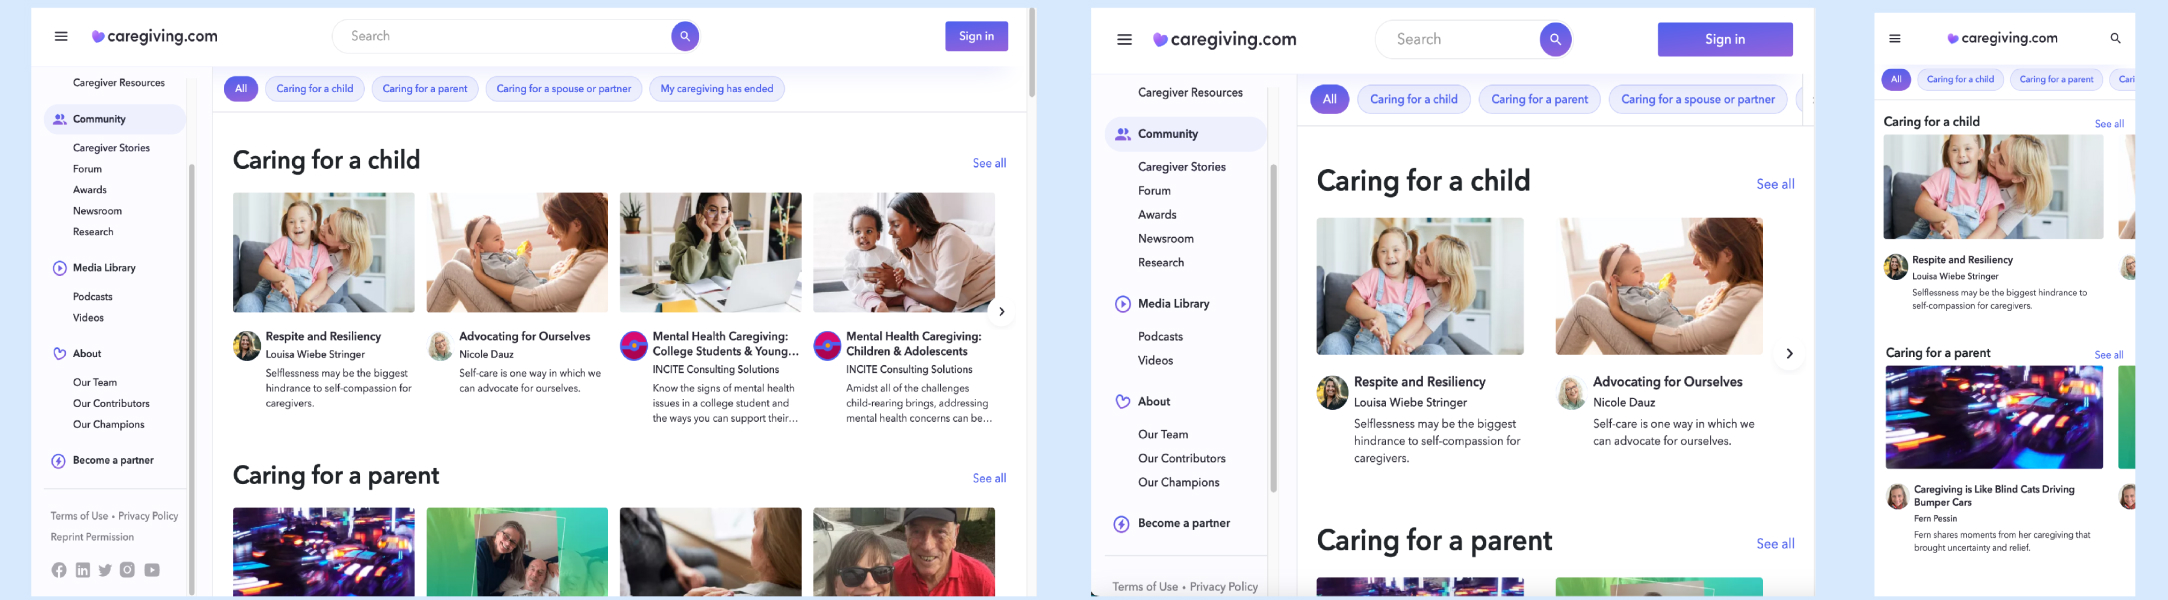 The caregiving website is in three frames: large, medium, and small format